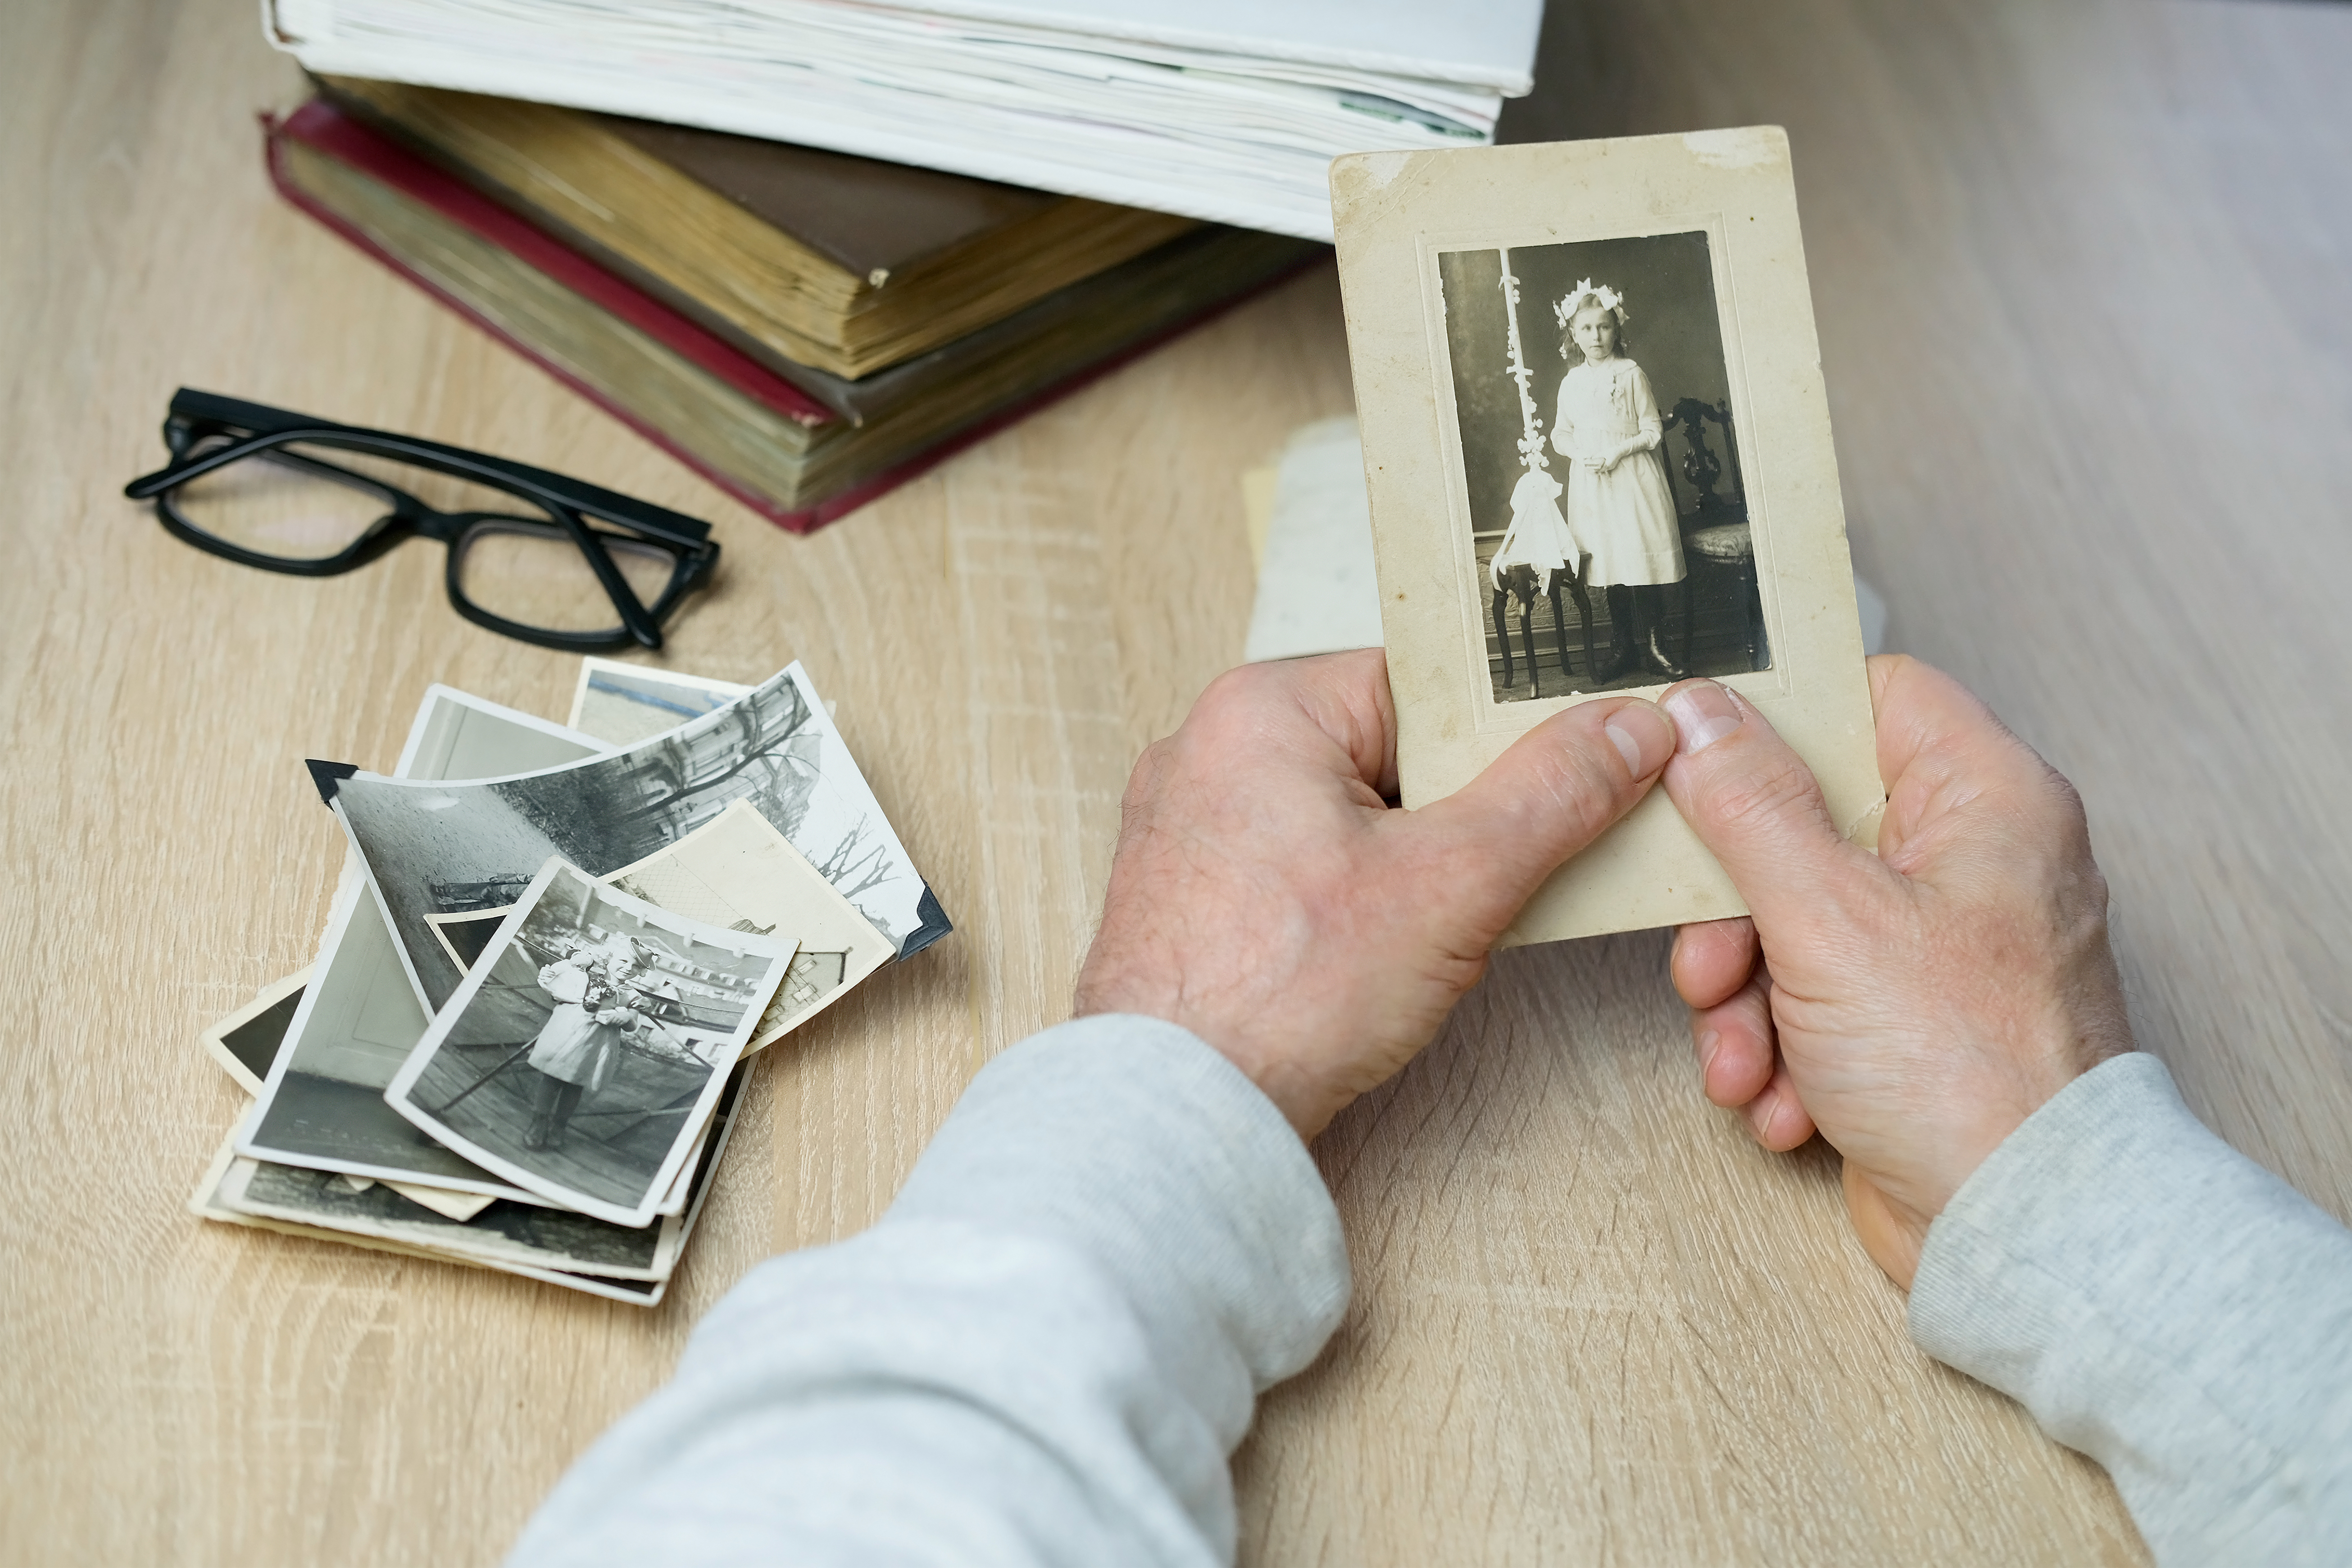 A person holding an old vintage photo | Source: Shutterstock